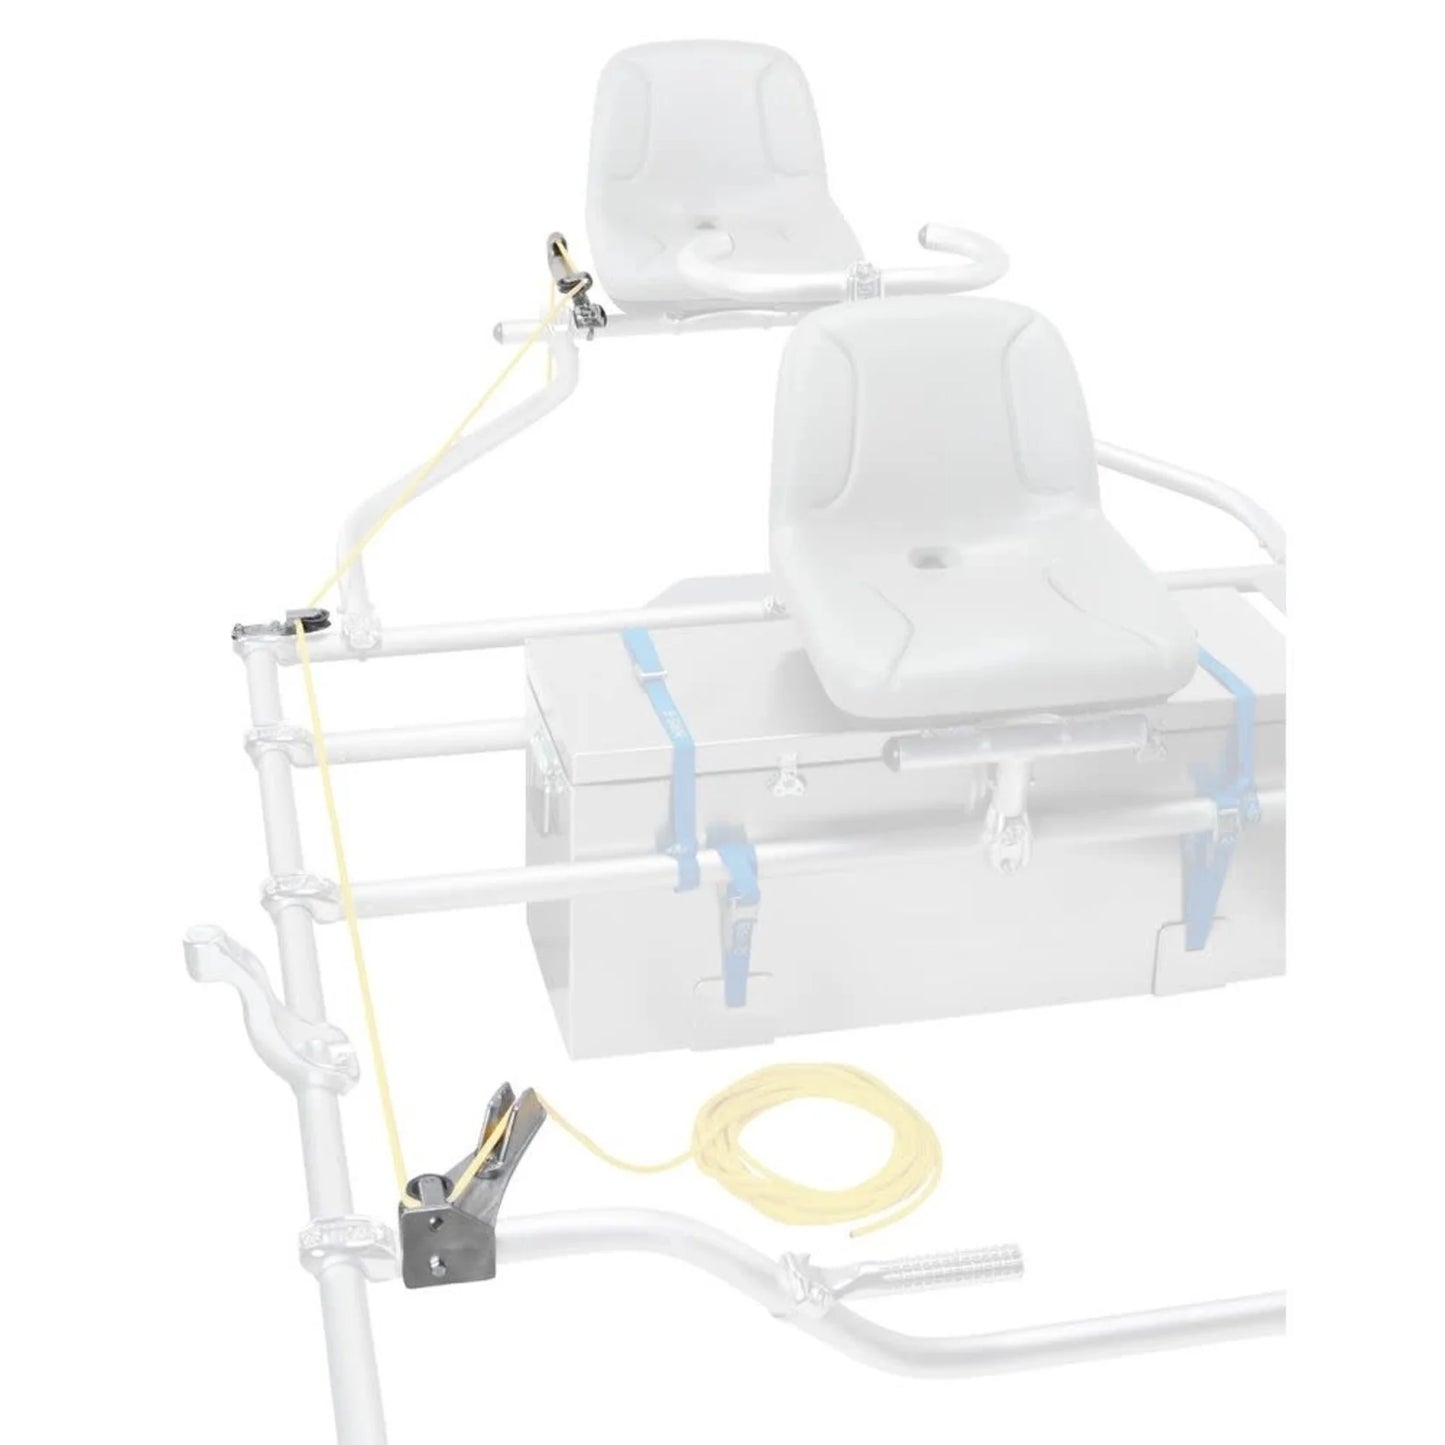 A white chair with a yellow cord attached to an NRS Frame Anchor System (old 1:1 style), perfect for relaxing while fishing in the river.